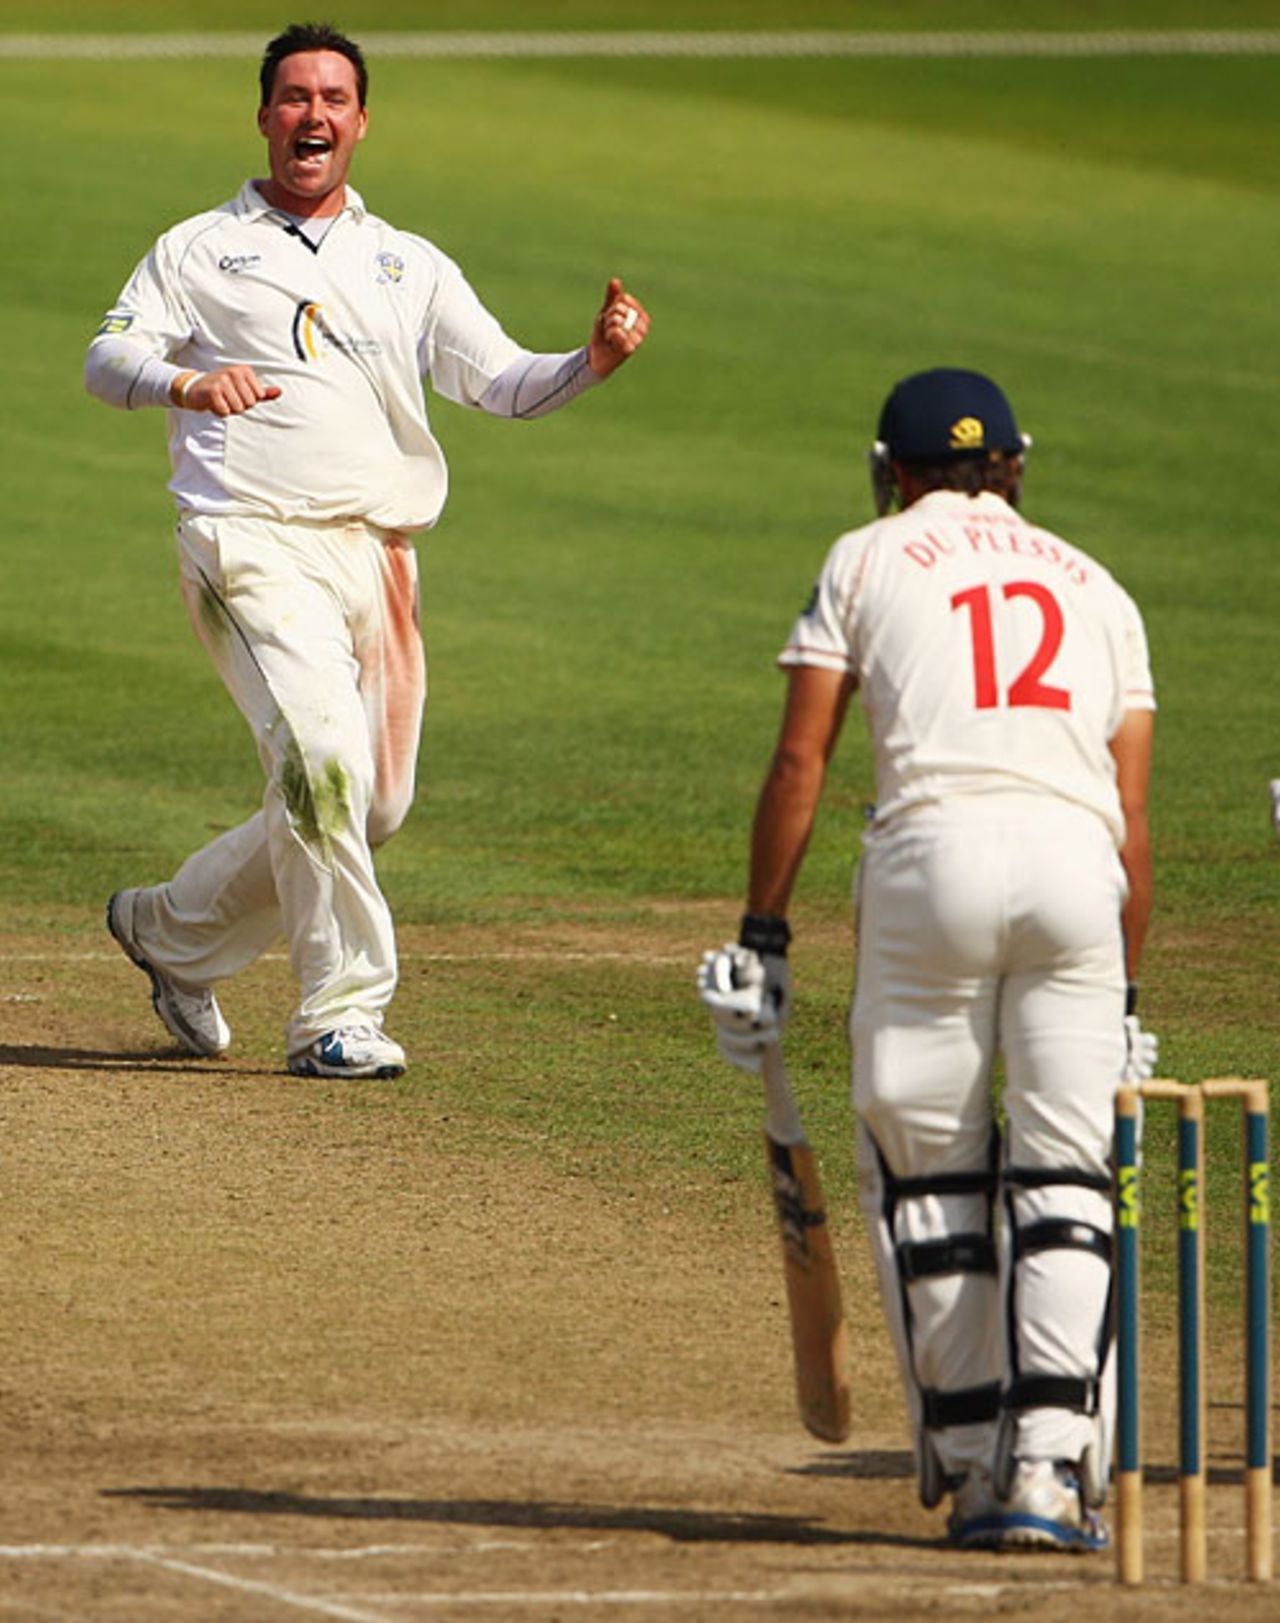 Ian Blackwell celebrates the wicket of Faf Du Plessis, Lancashire v Durham, County Championship, Division One, Old Trafford, August 12, 2009 